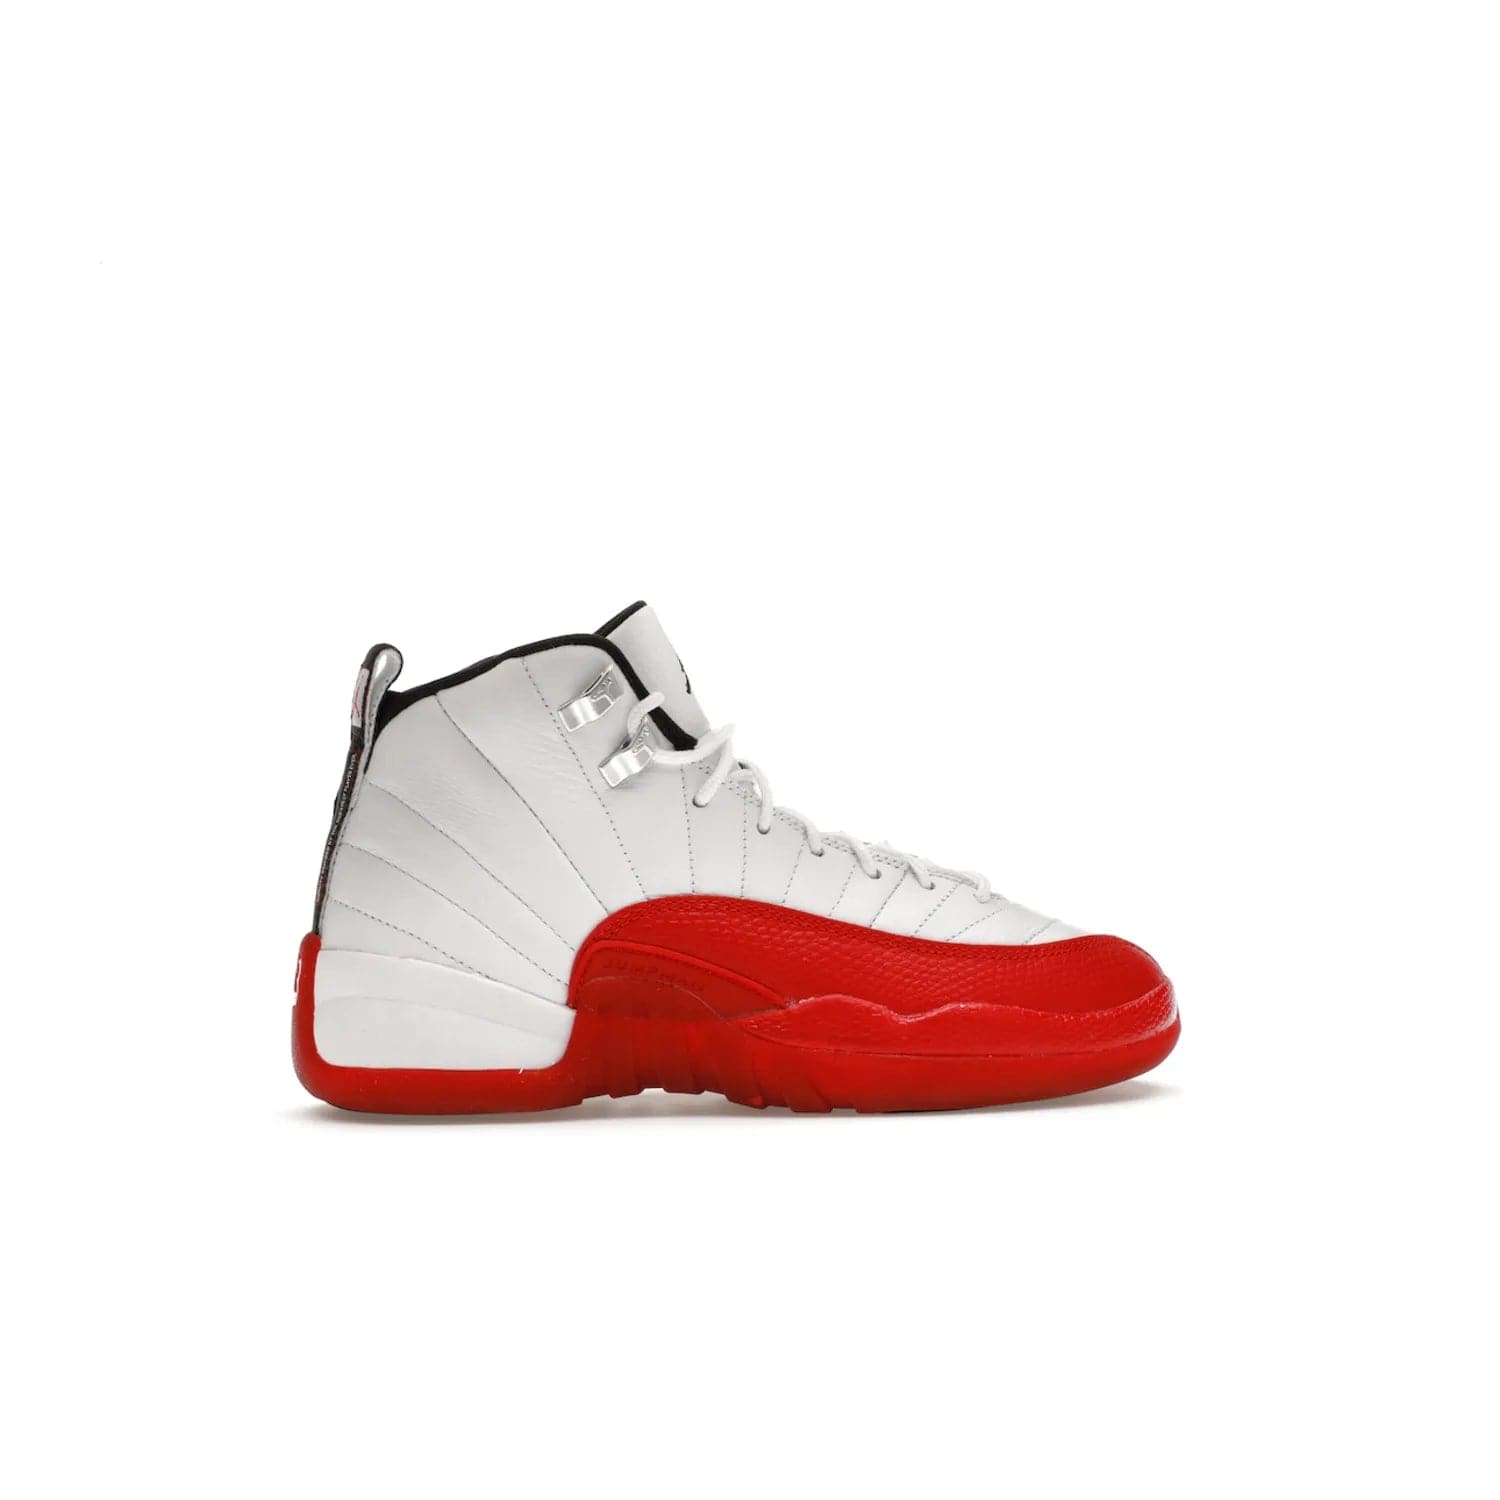 Jordan 12 Retro Cherry (2023) (GS) - Image 36 - Only at www.BallersClubKickz.com - Grab the Jordan 12 Retro Cherry (2023) (GS) and show off your signature style with these iconic kicks. Dressed in White, Black and Varsity Red, these timeless kicks are sure to turn heads. Available October 28, 2023.